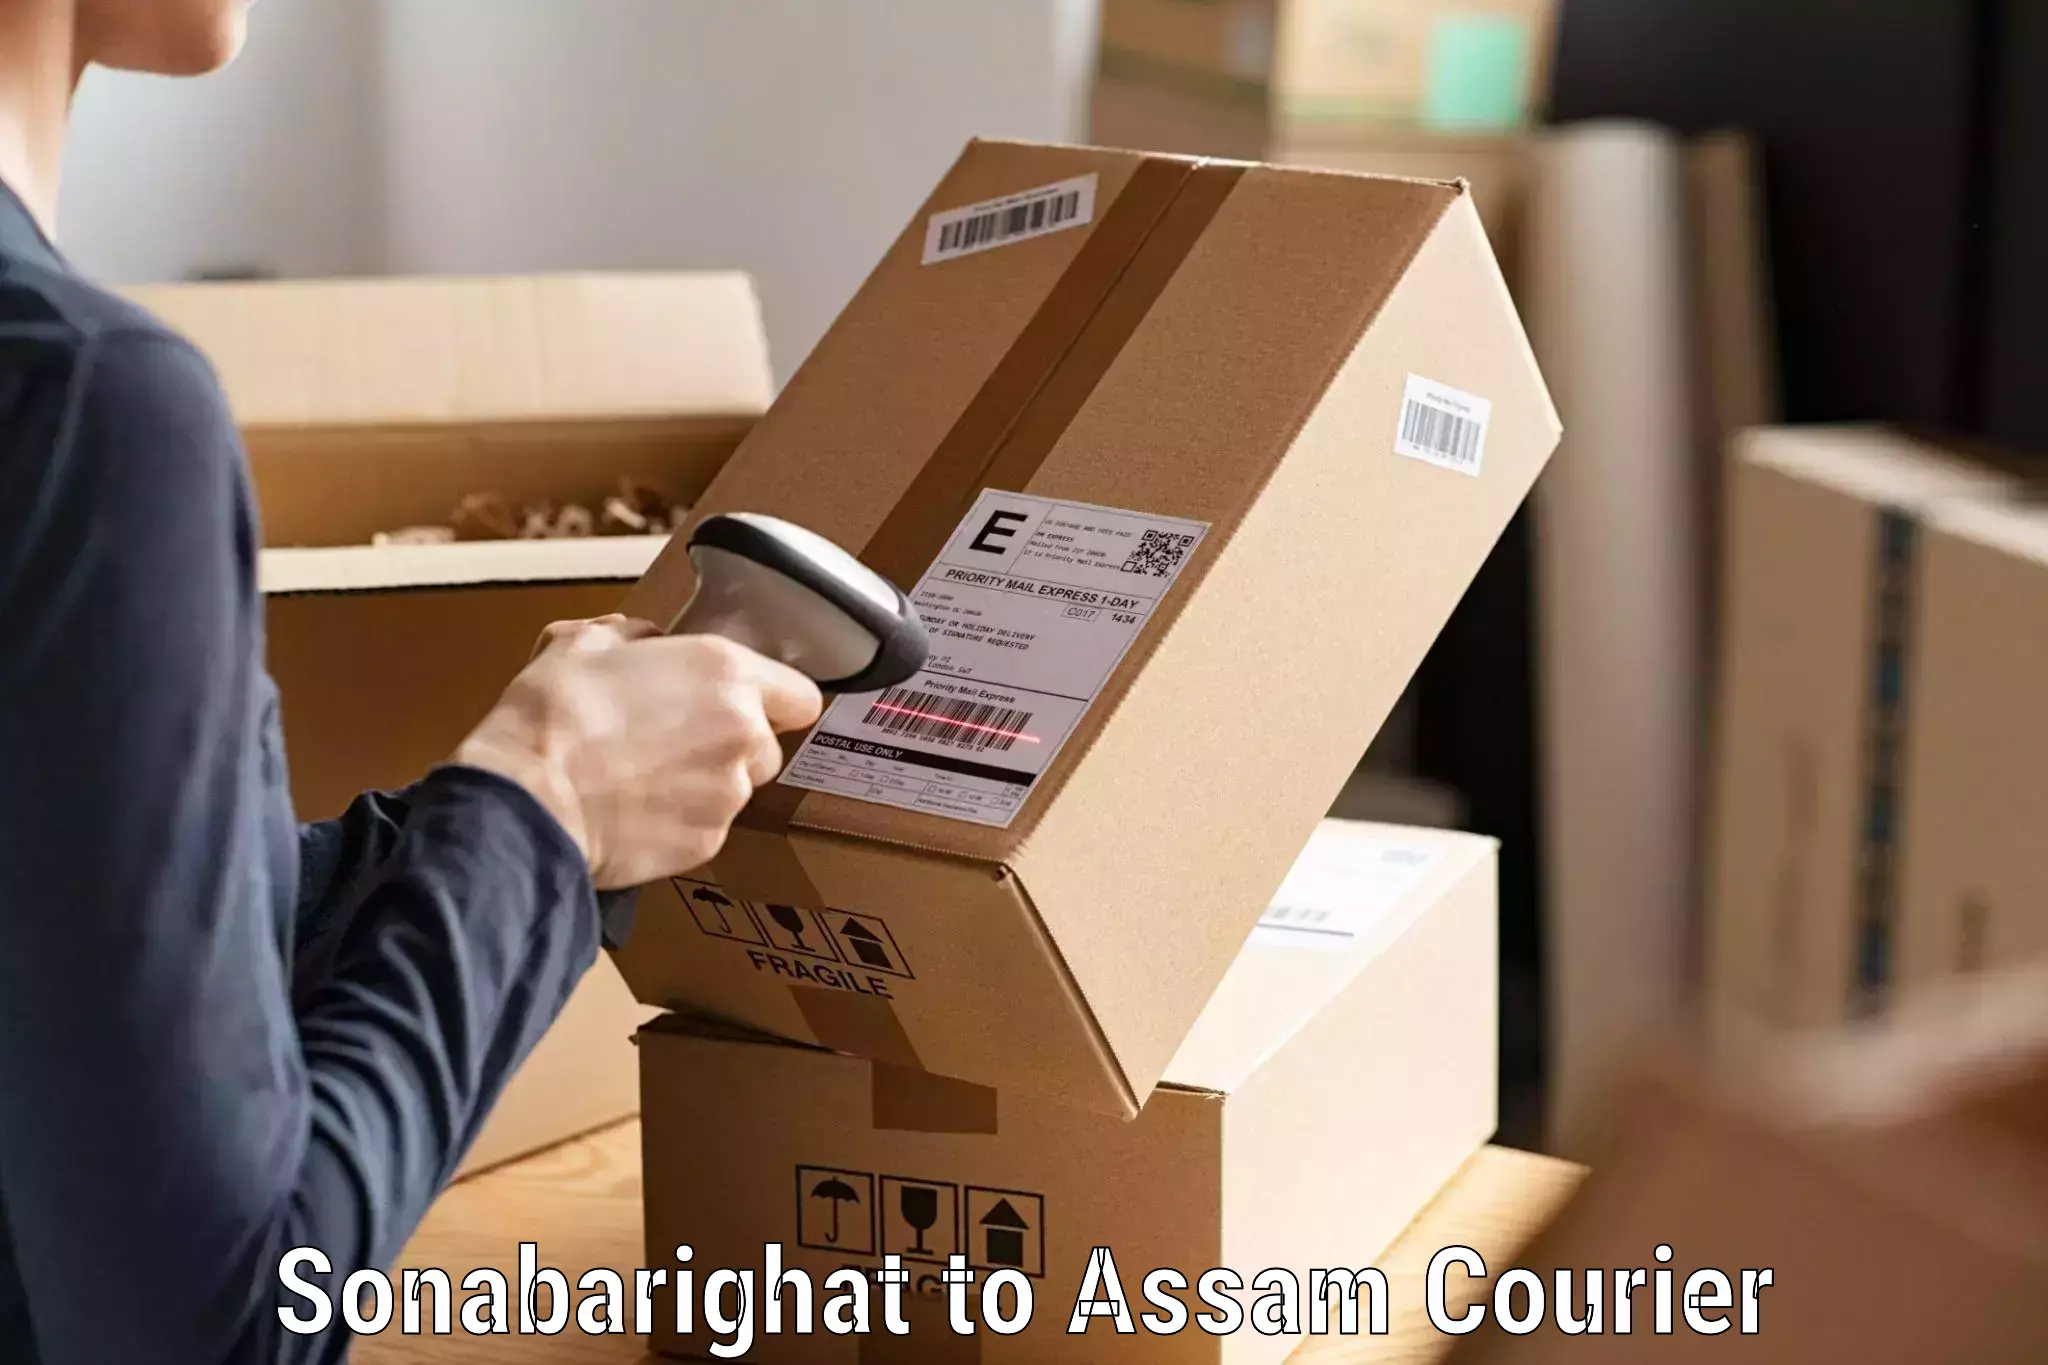 Seamless shipping experience Sonabarighat to Guwahati